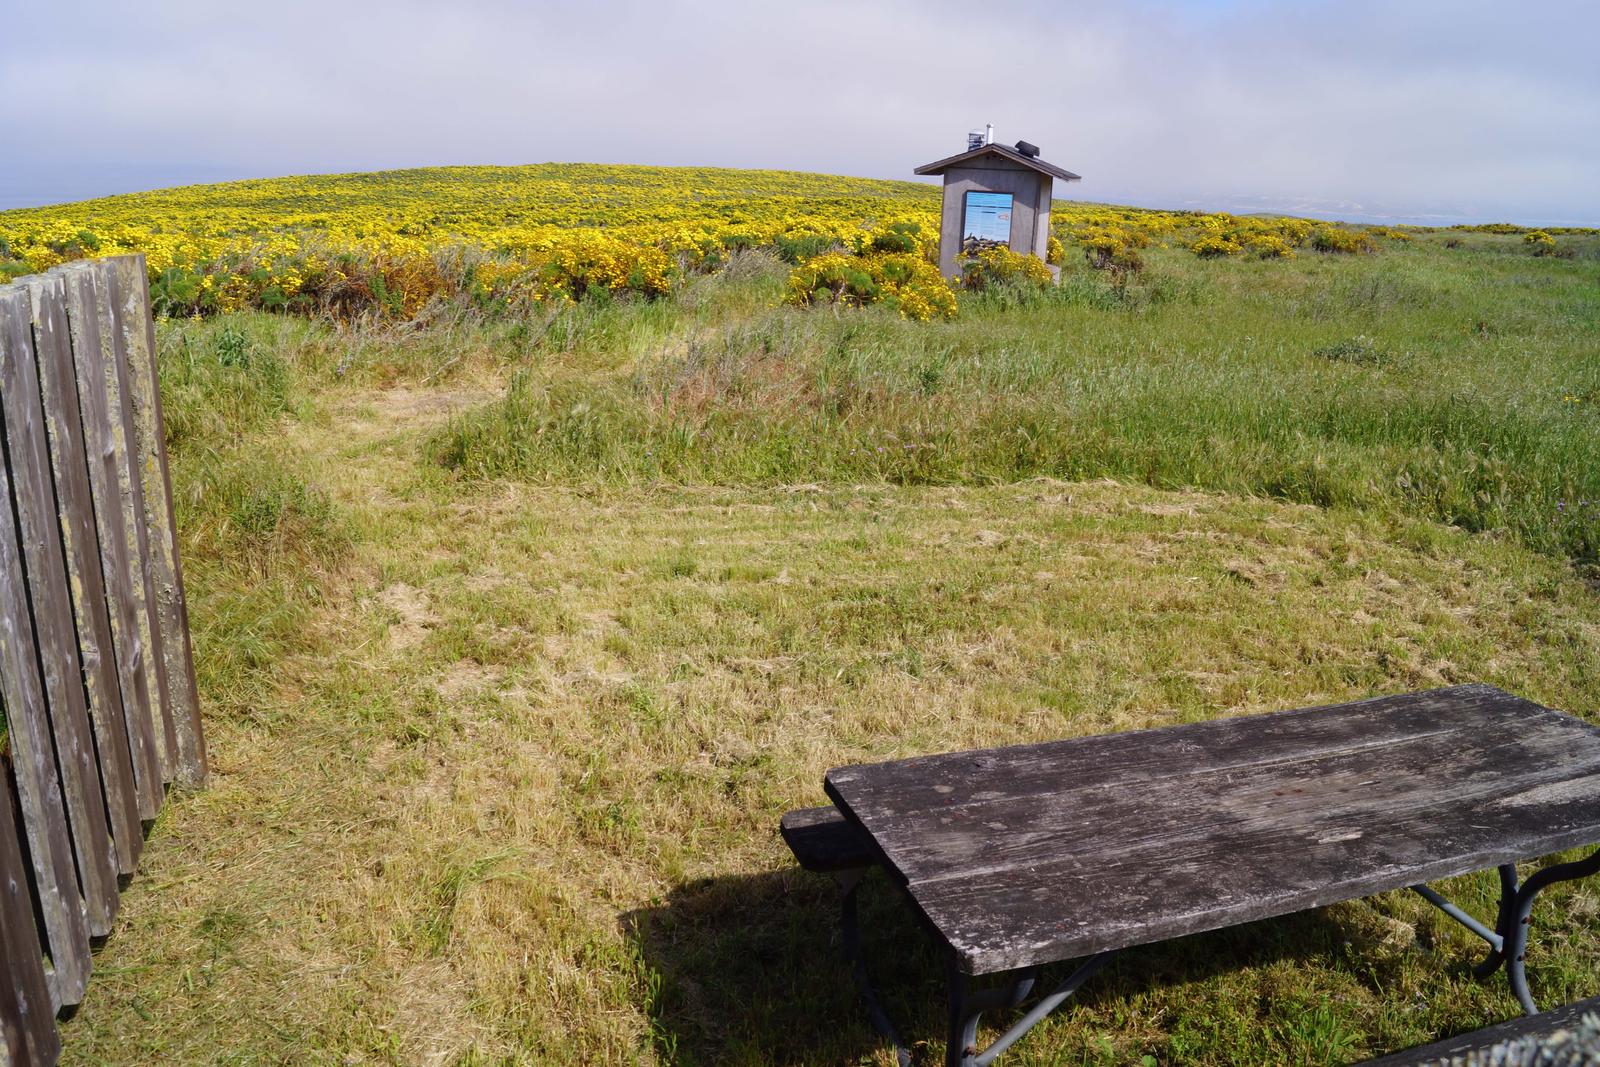 Picnic table and windbreak surrounded by grass and yellow flowered plant. SAN MIGUEL ISLAND AREA - 009
